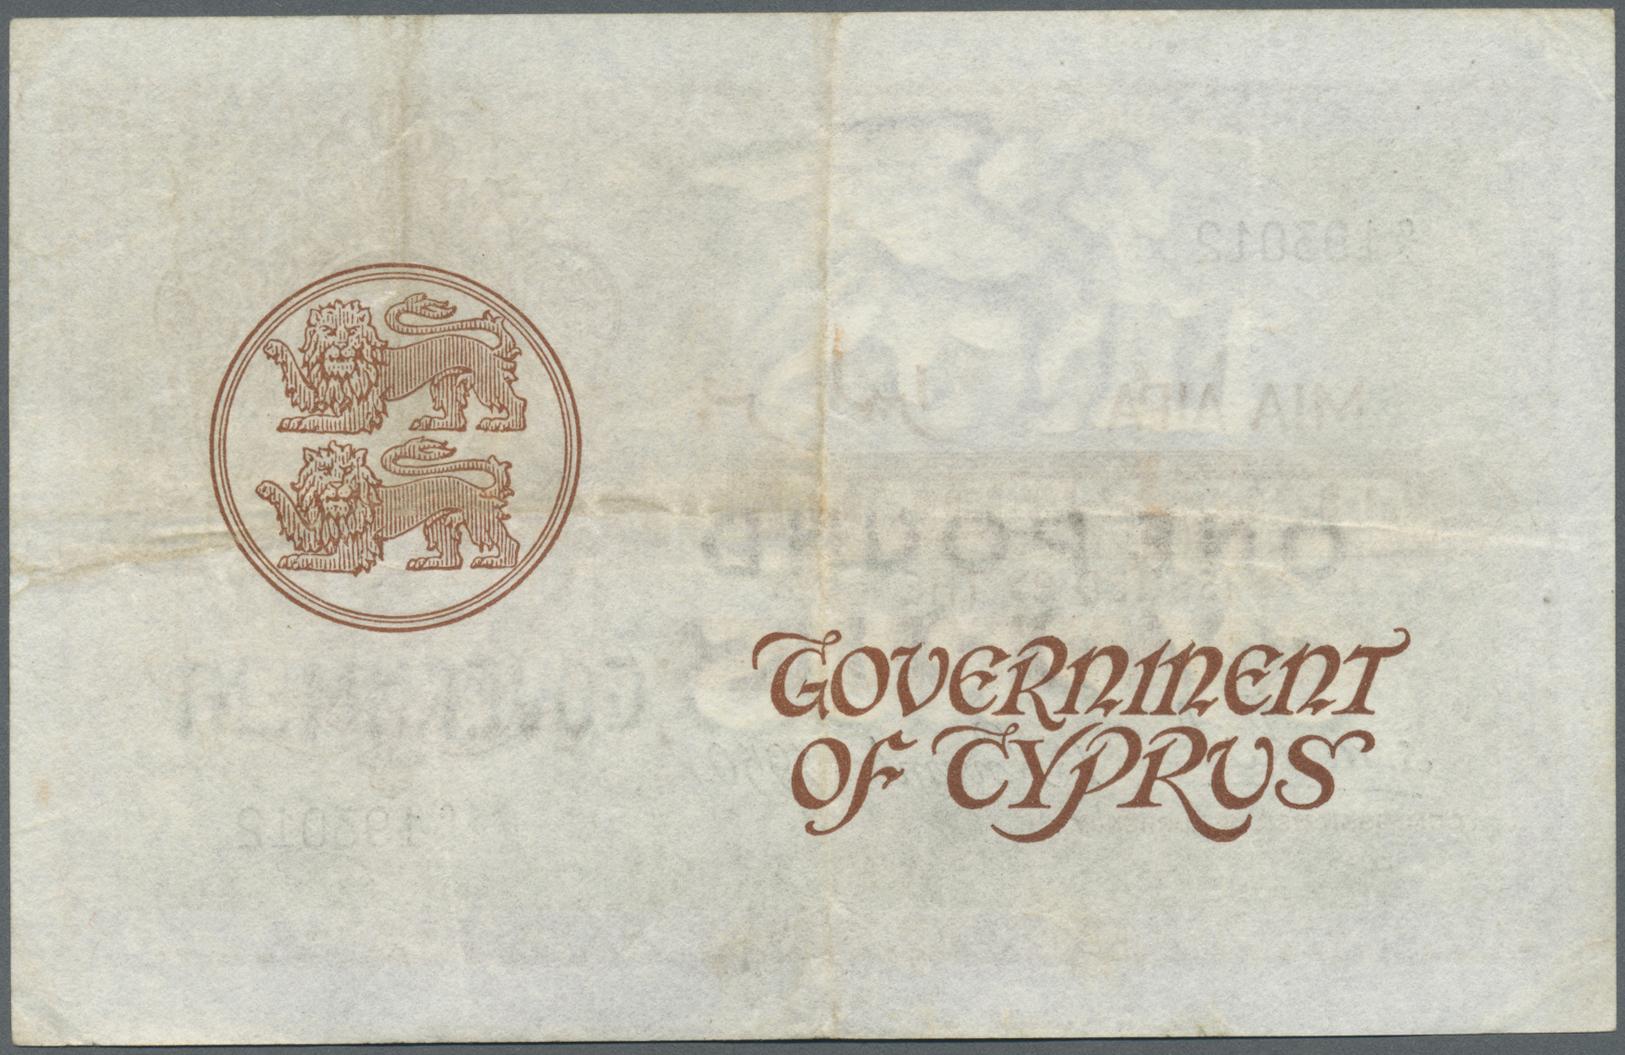 00613 Cyprus / Zypern: 1 Pound 1950 P. 24 Used With Vertical And Horizotal Folds, No Holes Or Tears, Still Strongness In - Cyprus